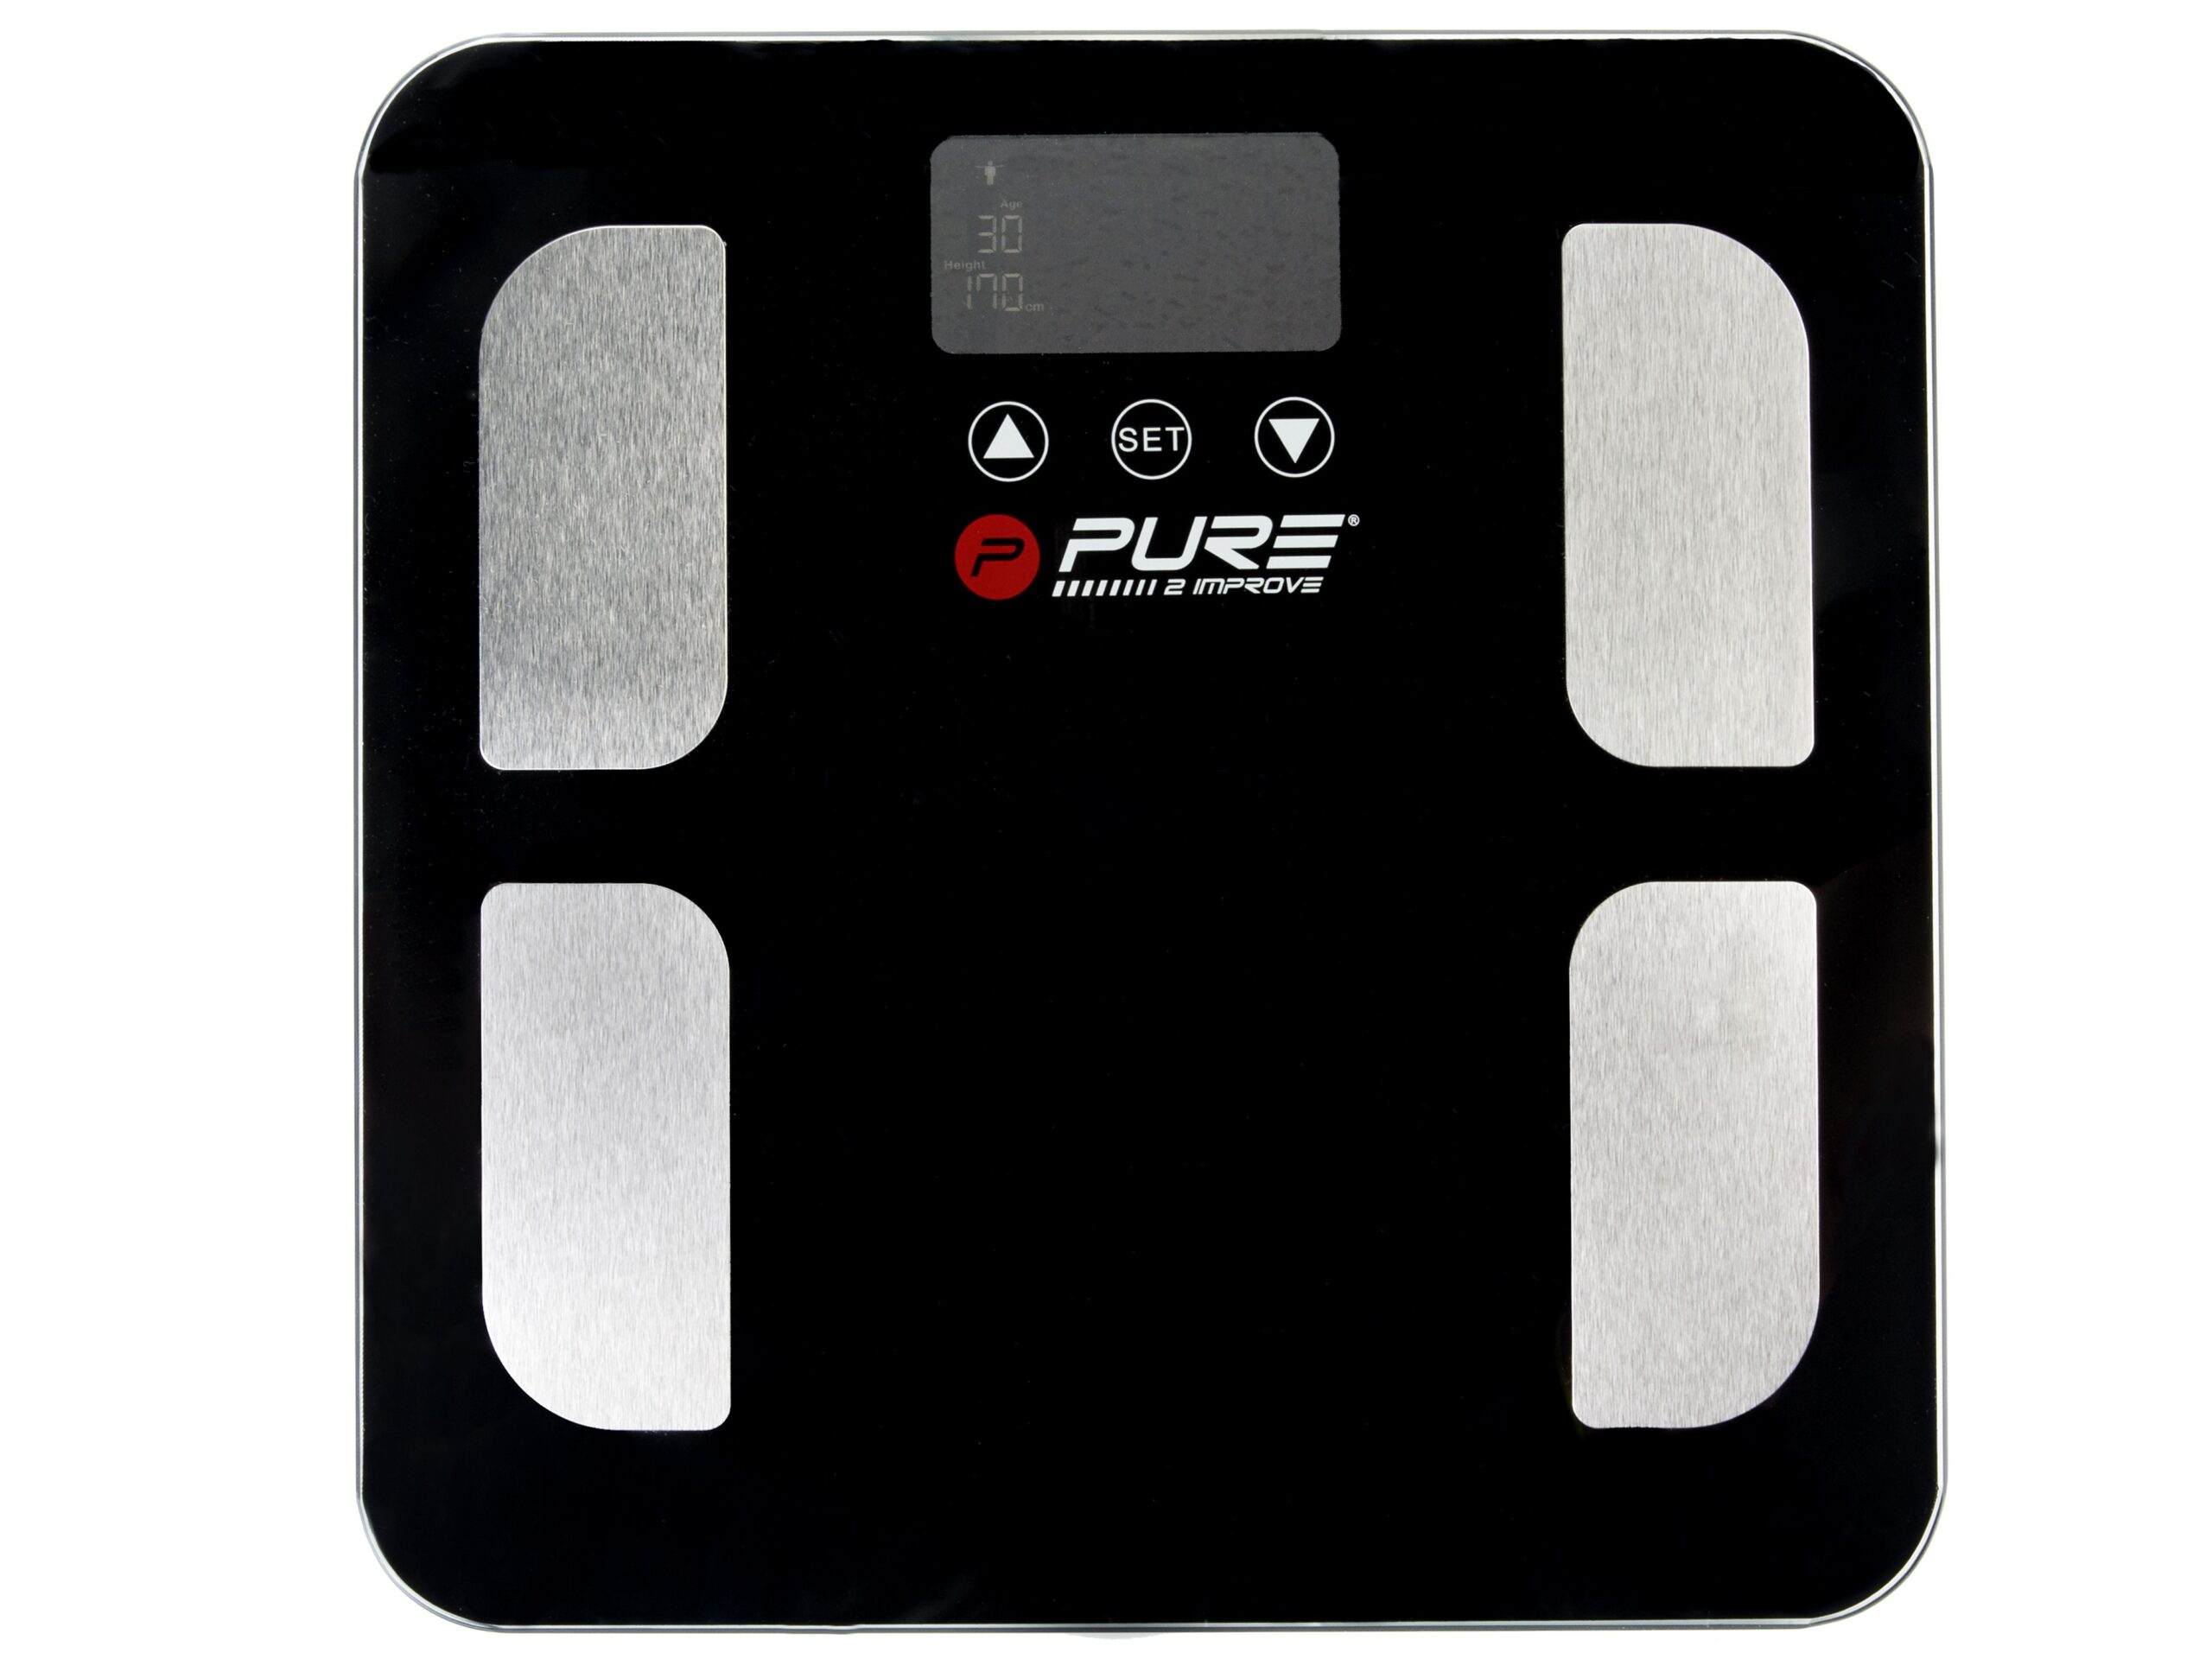 Pure 2Improve smart scale - Medpoint